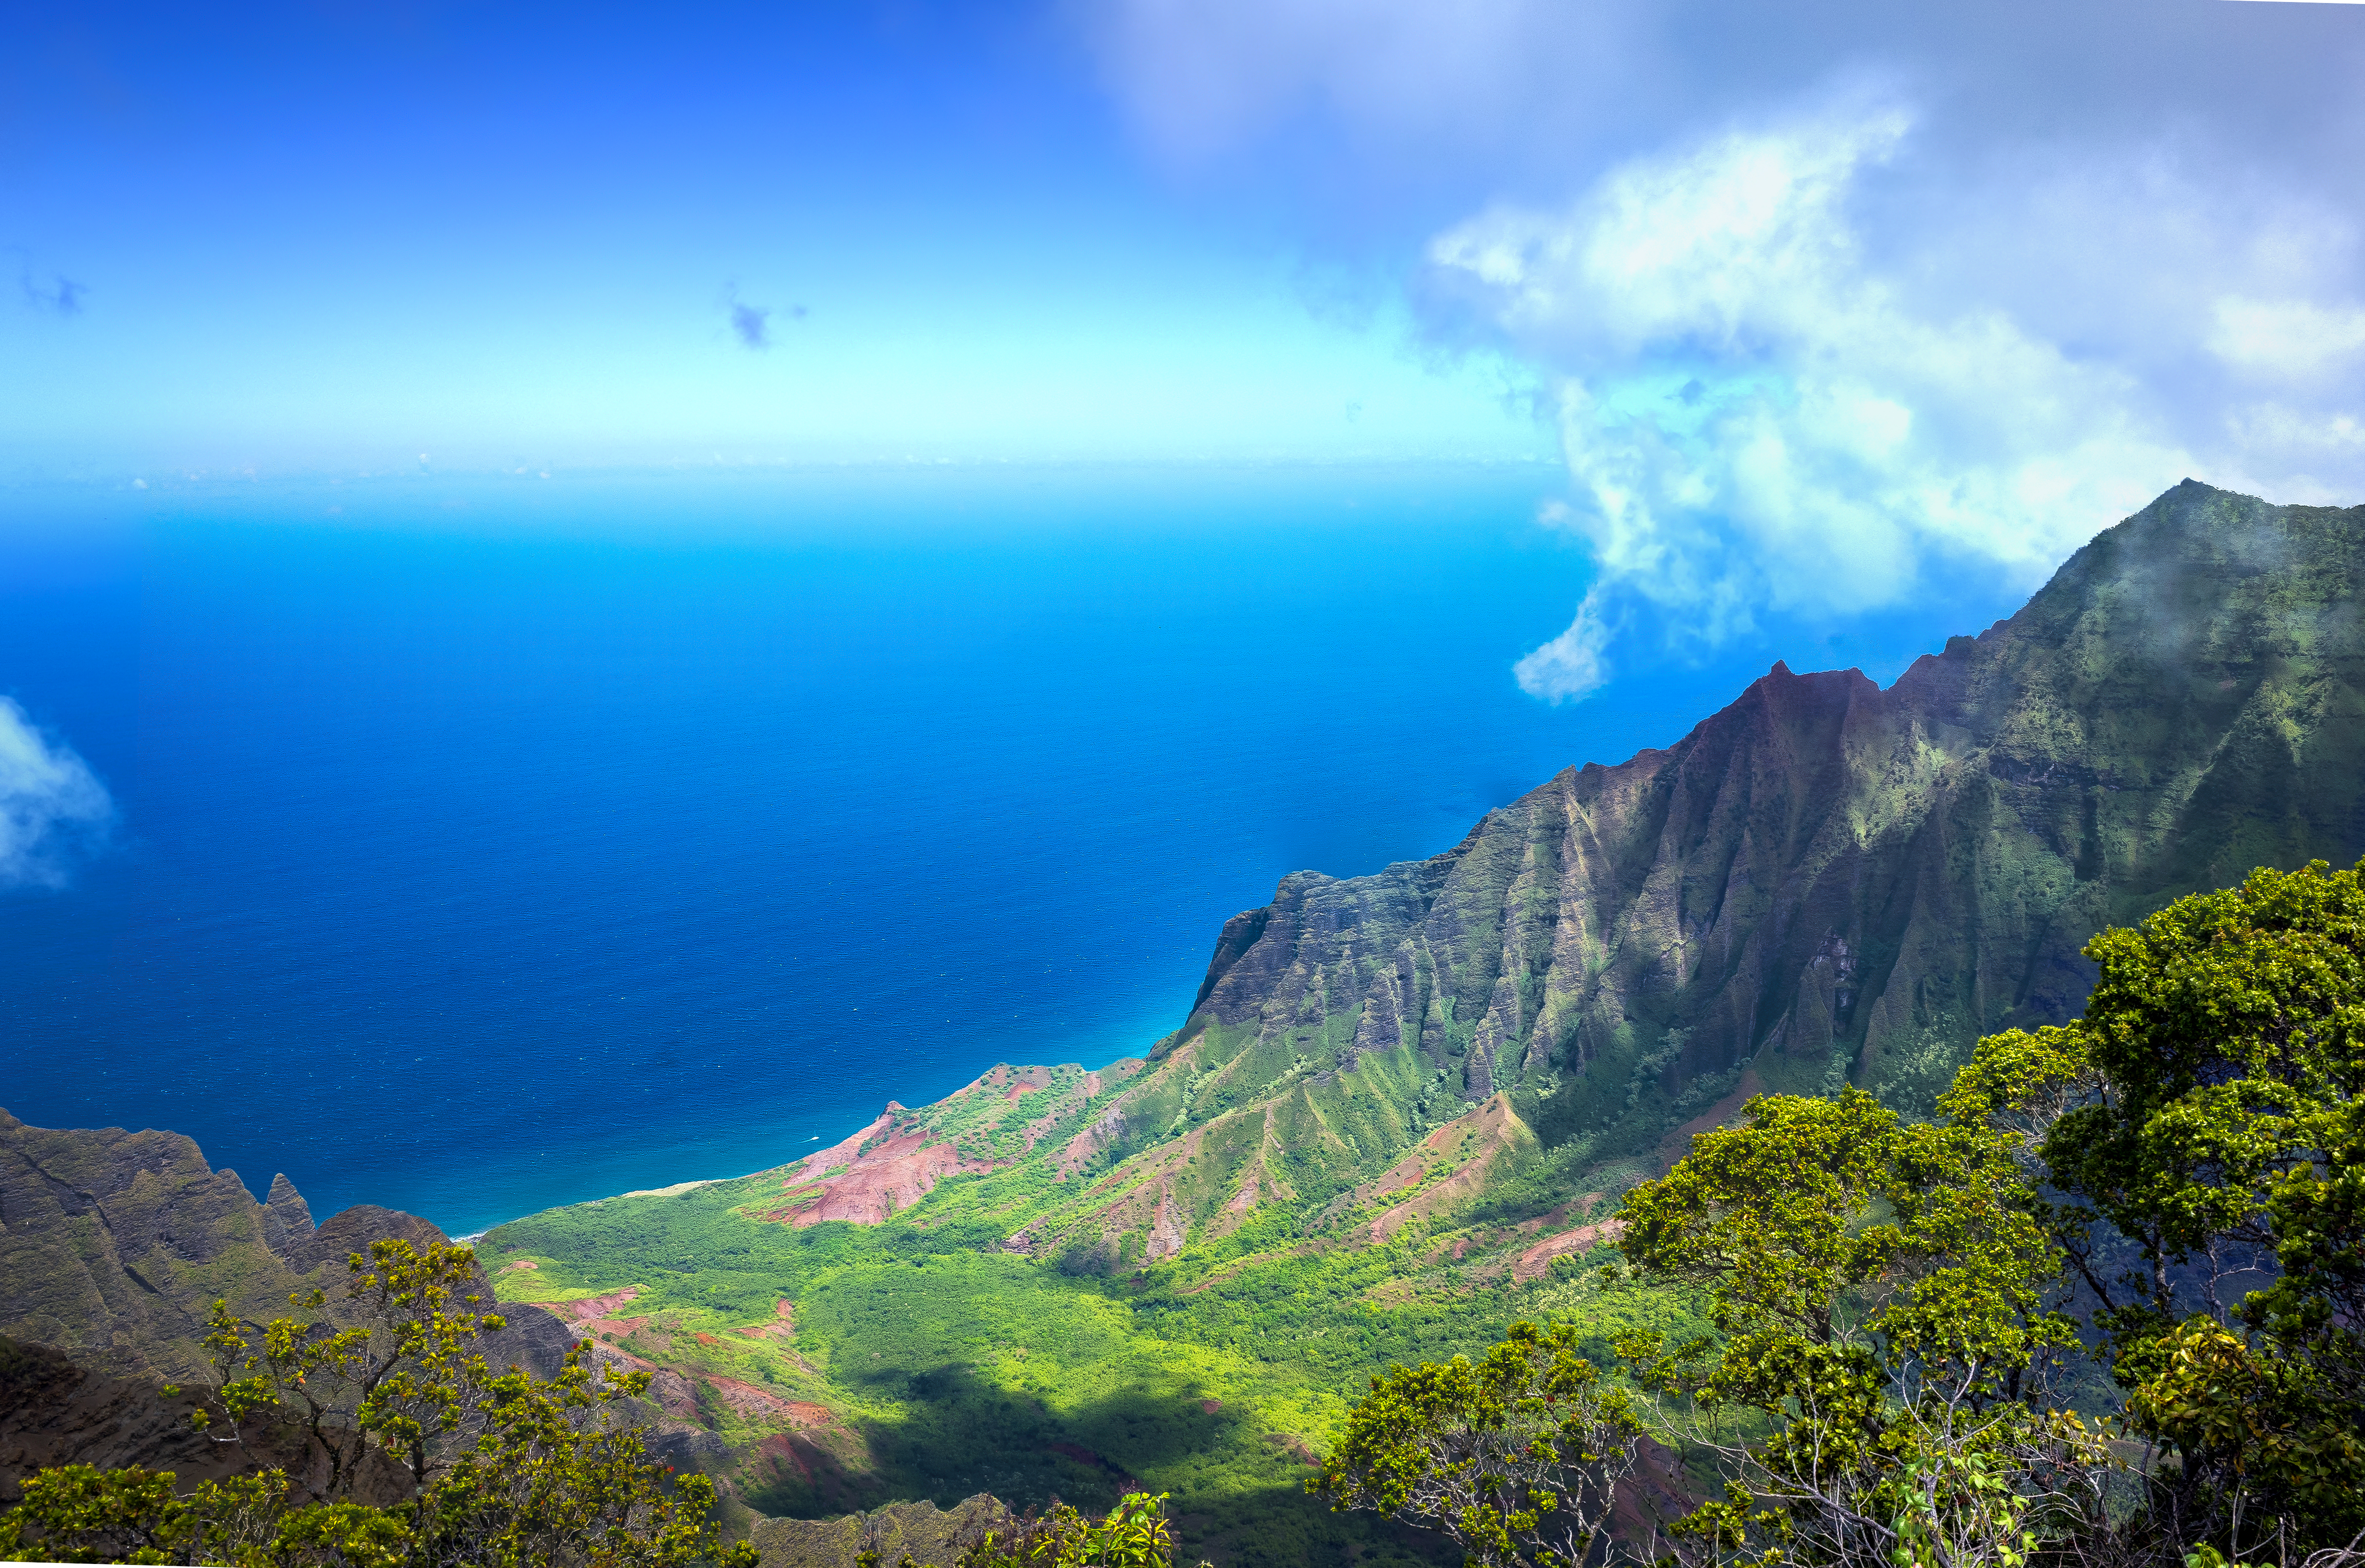 View of the Napali Coast and valley